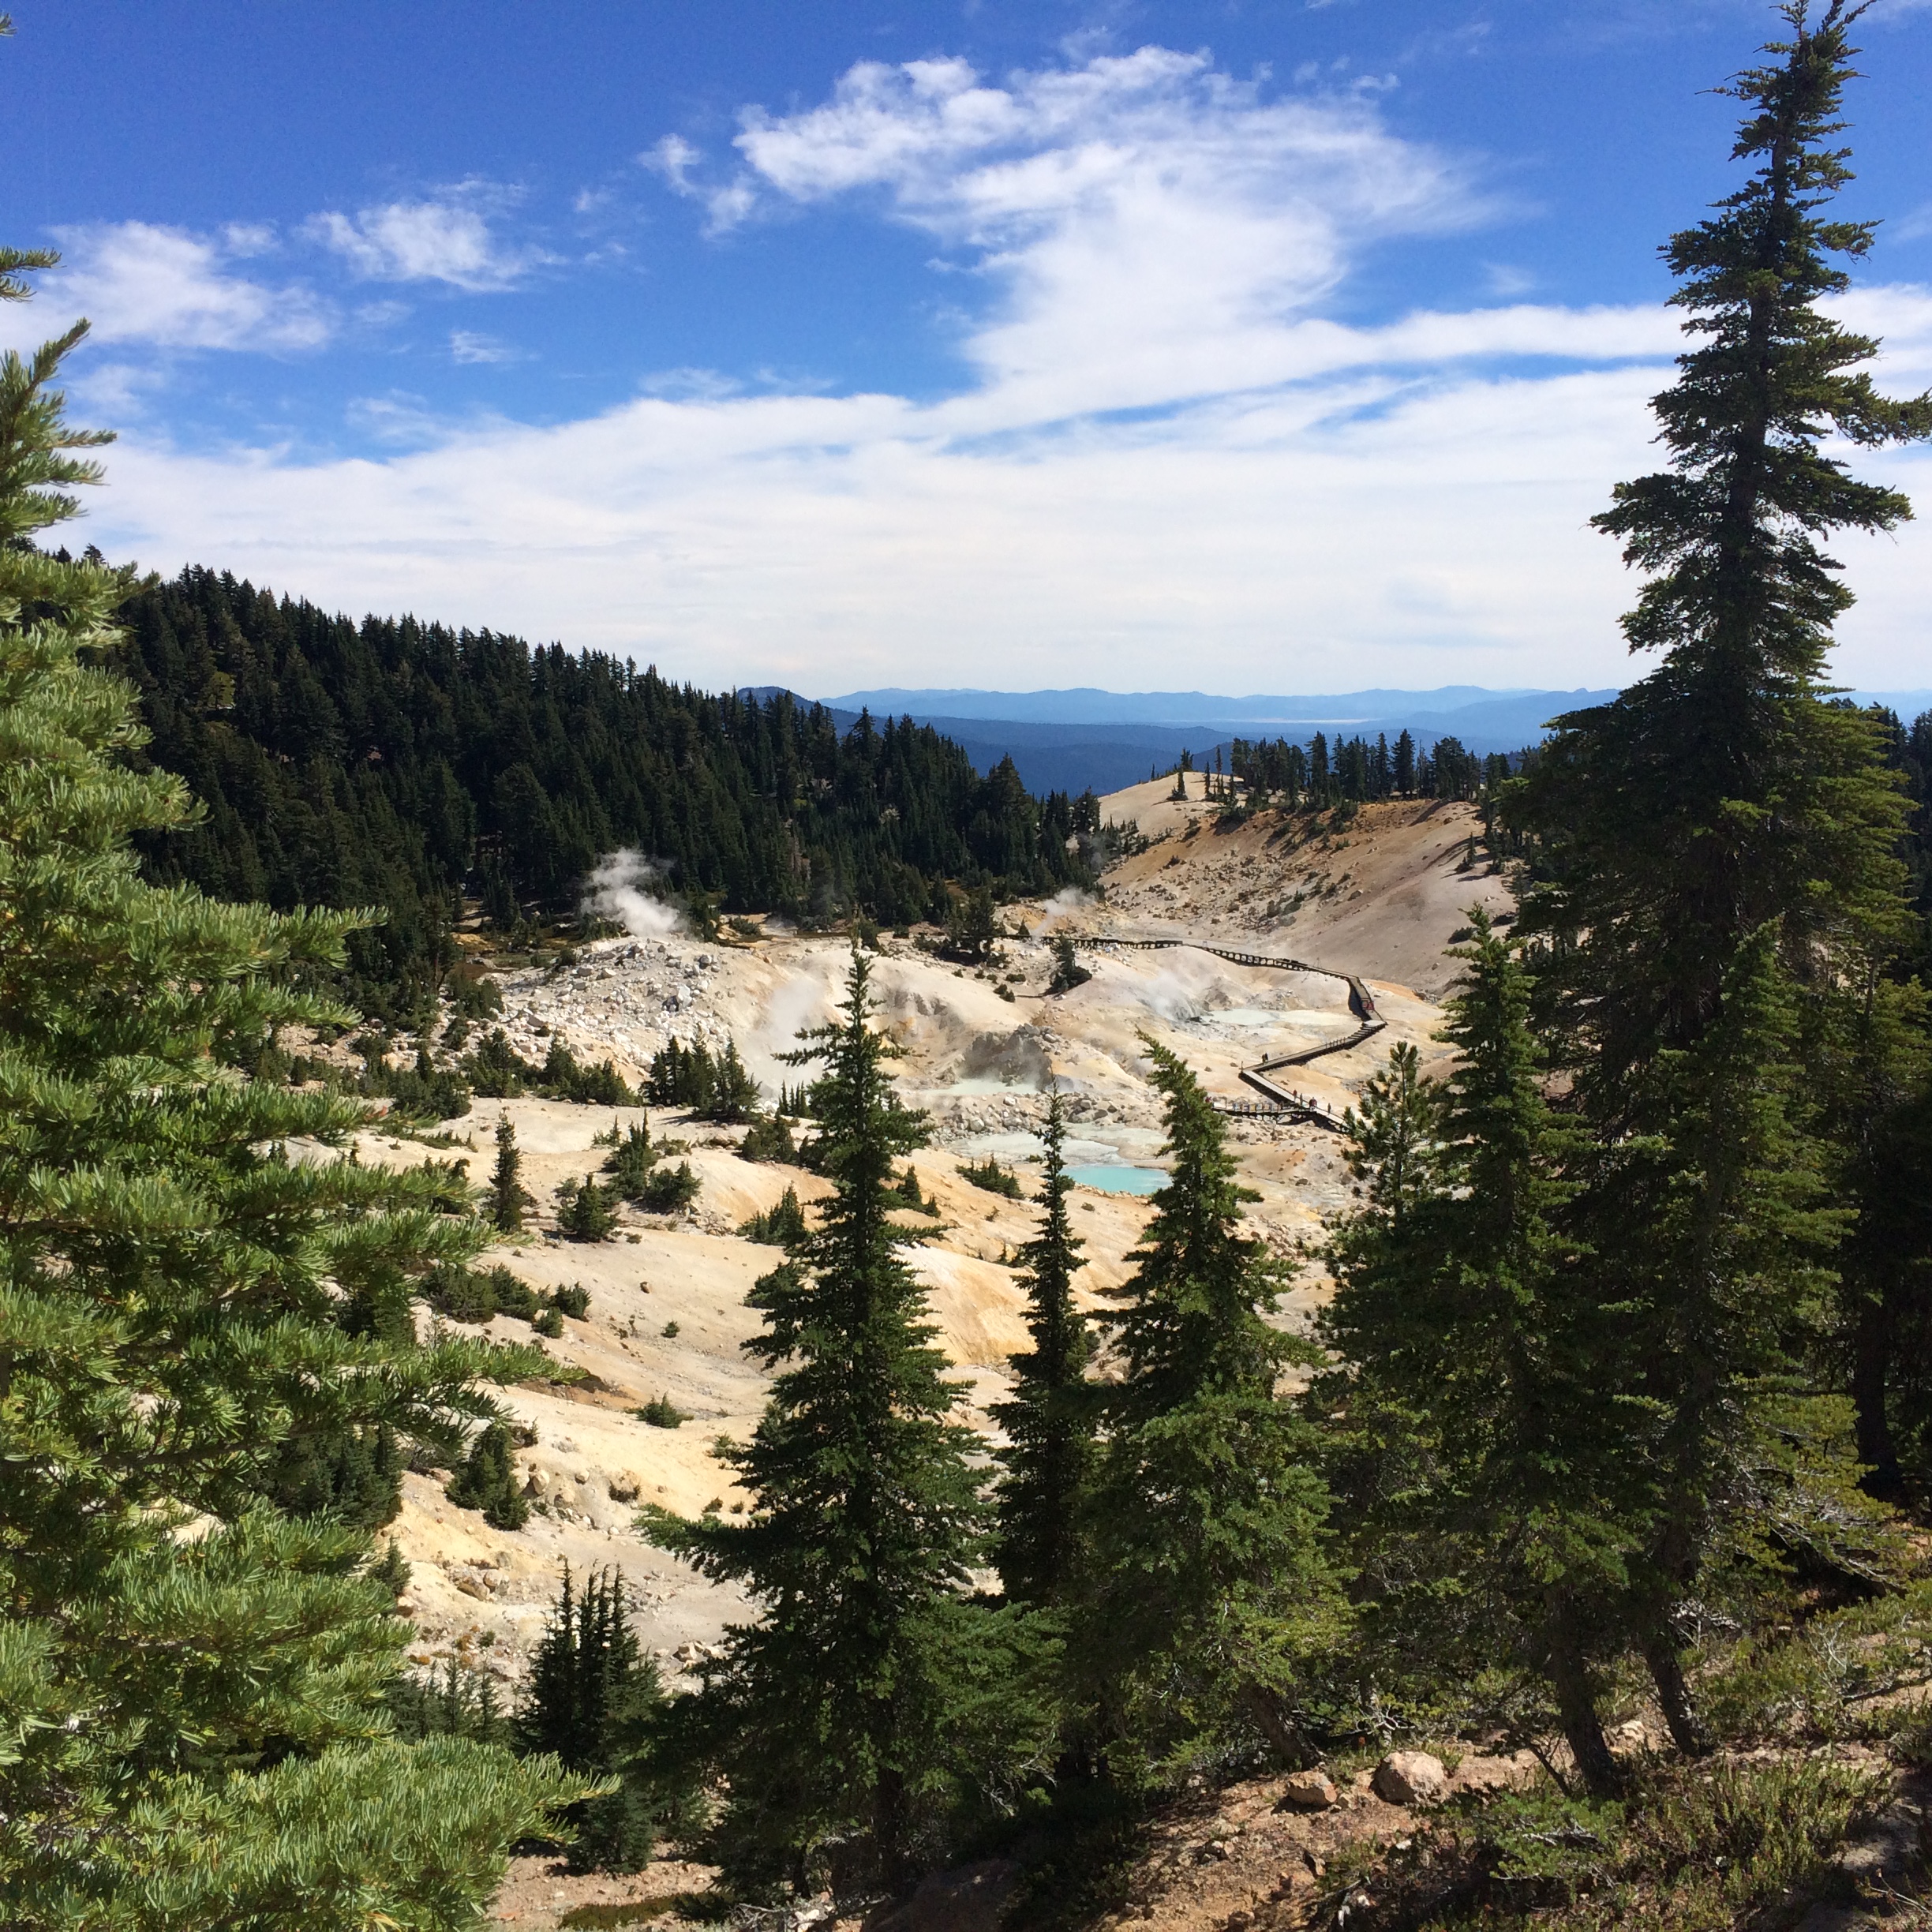 48 Hours in Lassen Volcanic National Park (Itinerary + Things to Do!) - Be  My Travel Muse